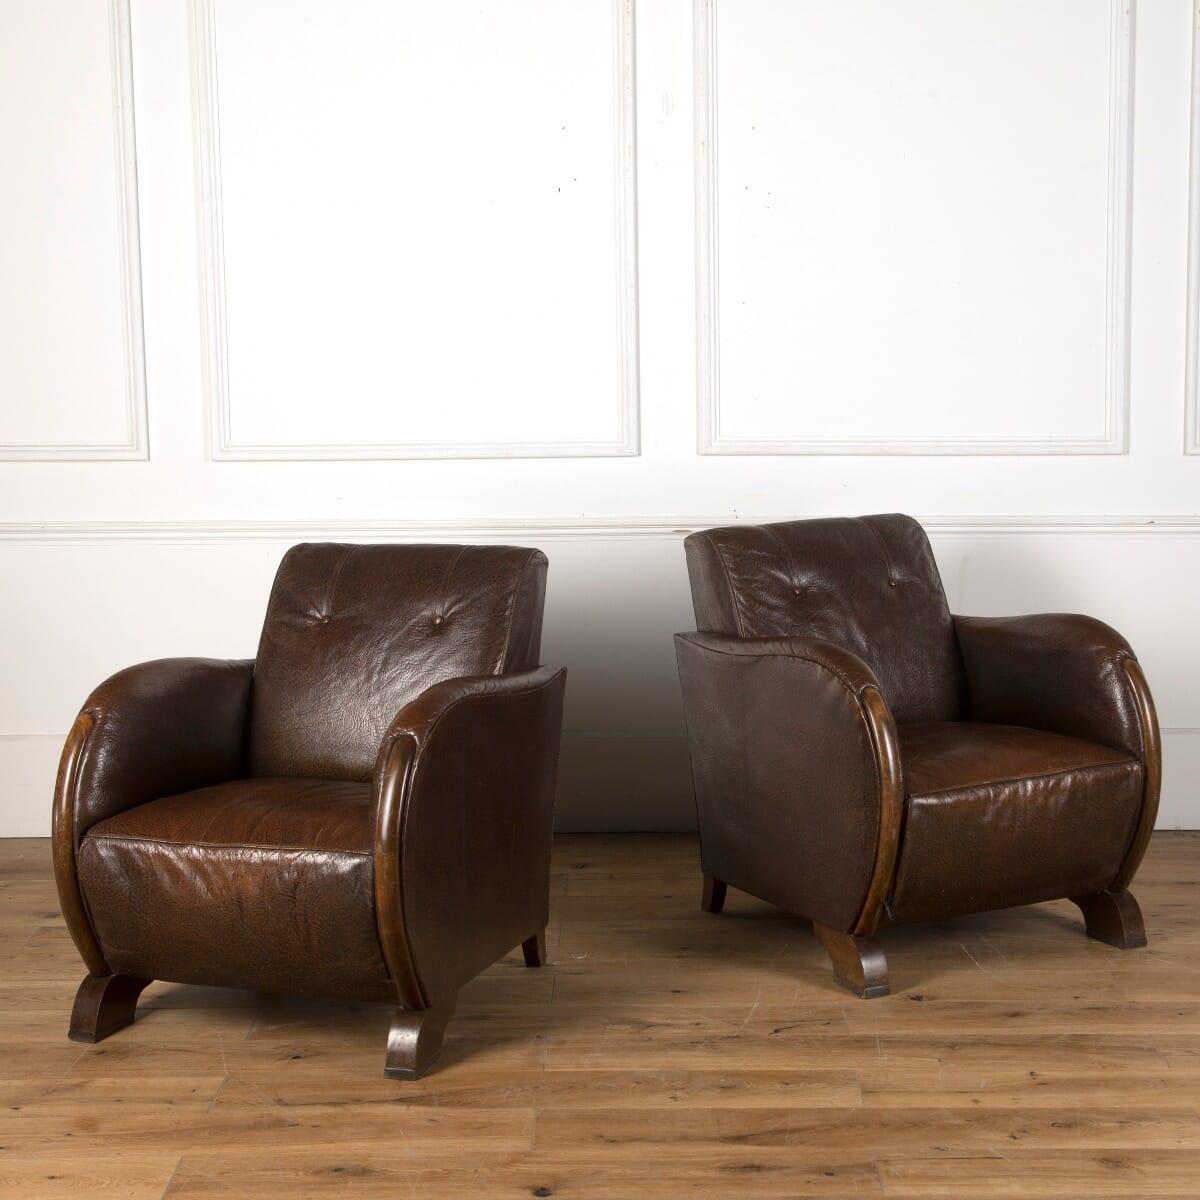 A pair of French Art Deco style club chairs, upholstered in their original leather with walnut detail, circa 1930.